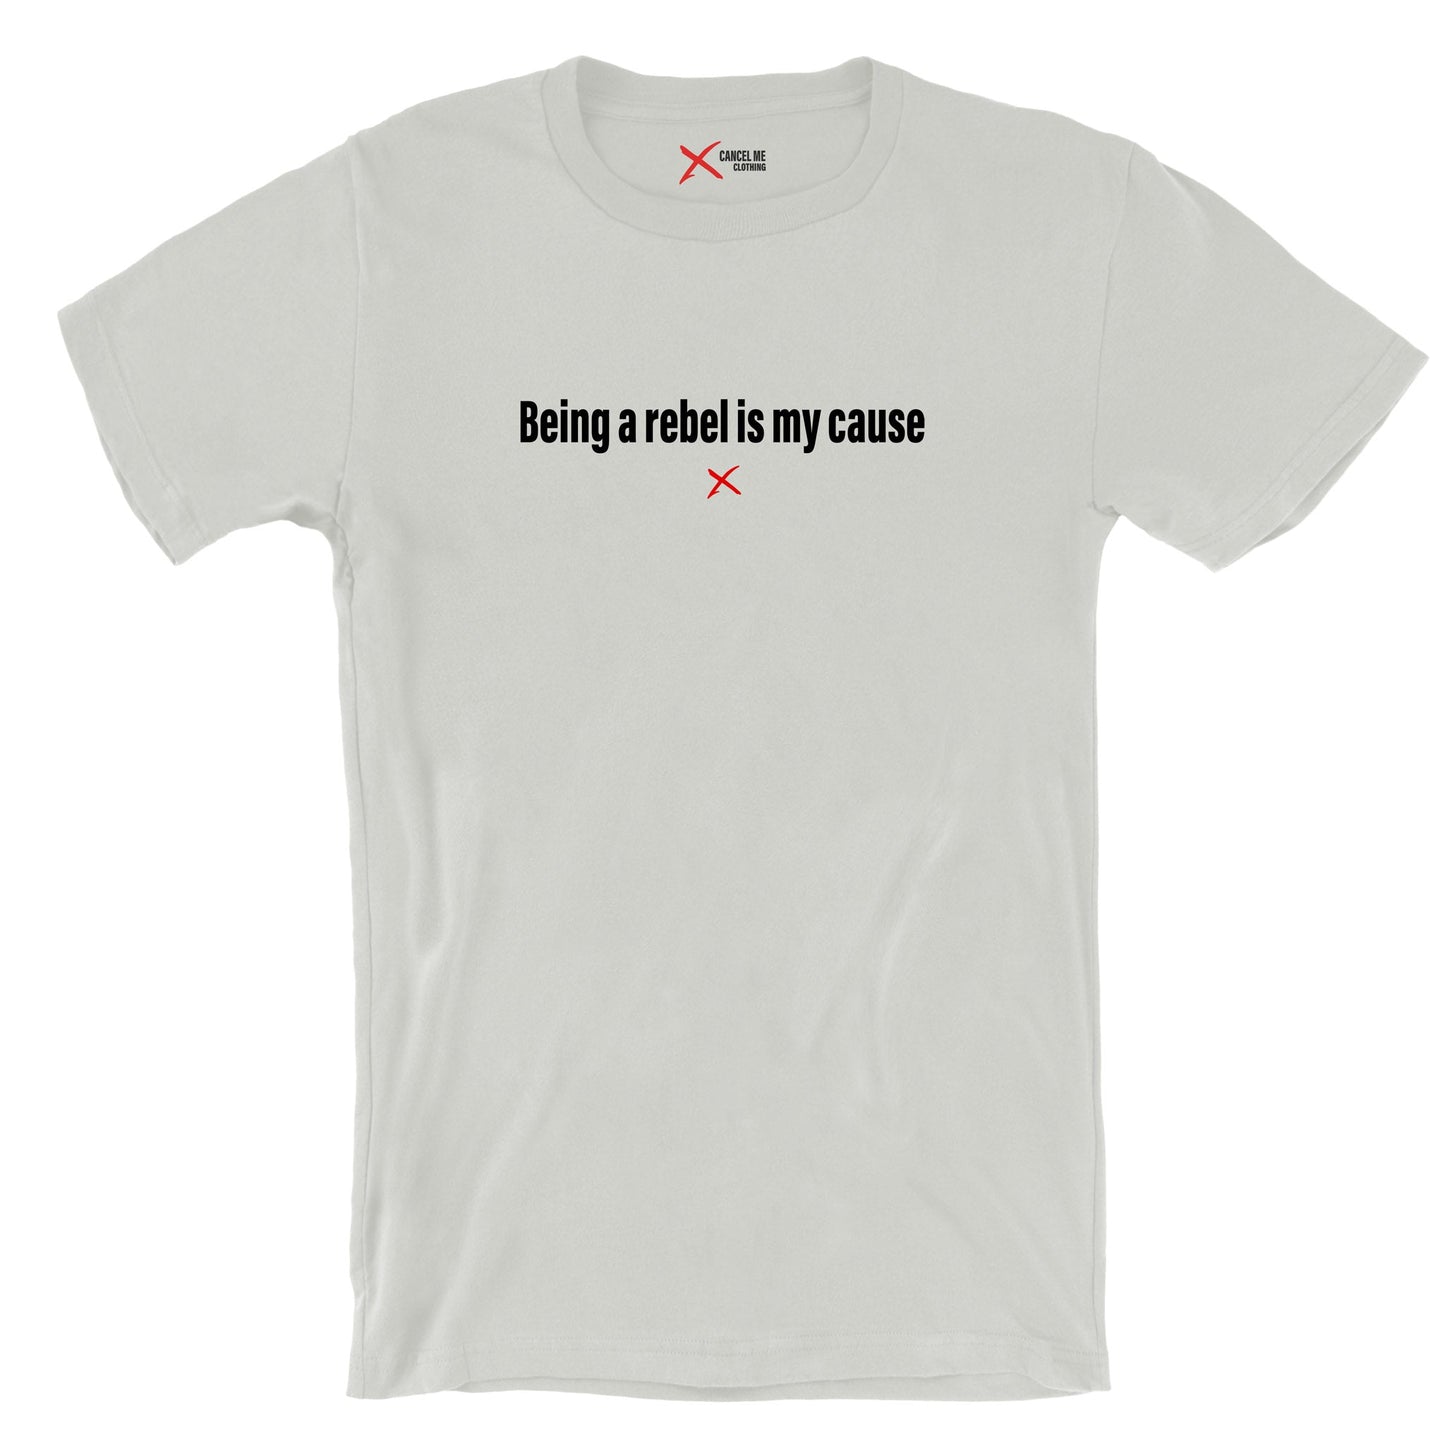 Being a rebel is my cause - Shirt